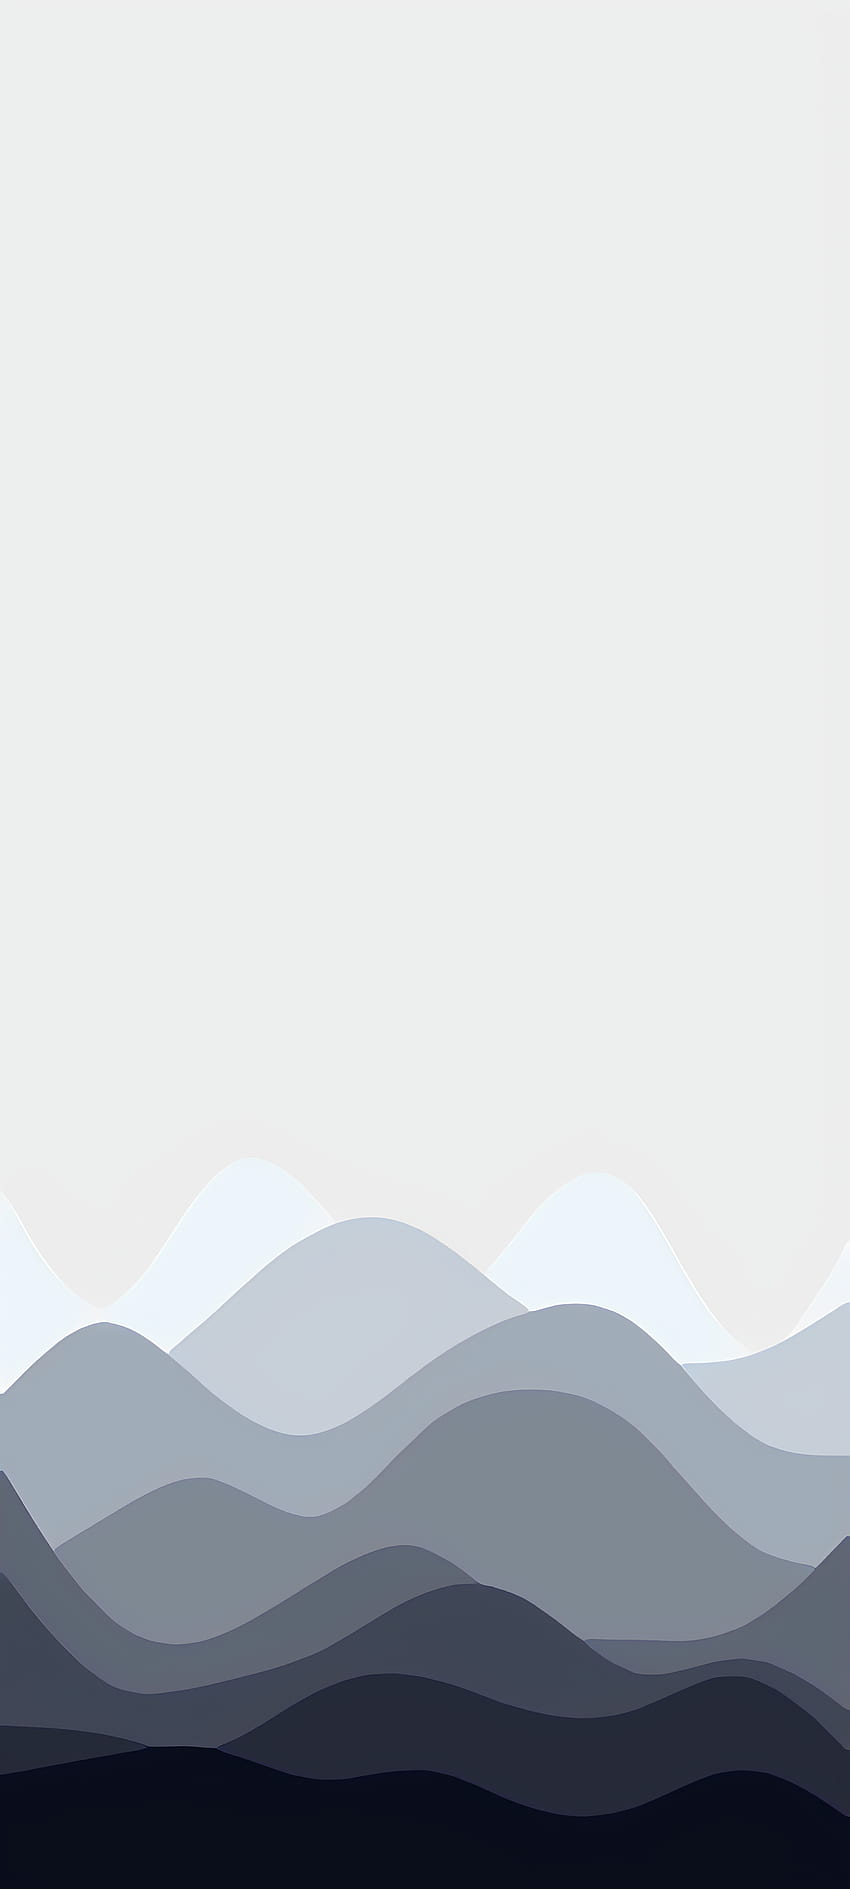 Abstract waves for iPhone, Minimalist Wave HD phone wallpaper